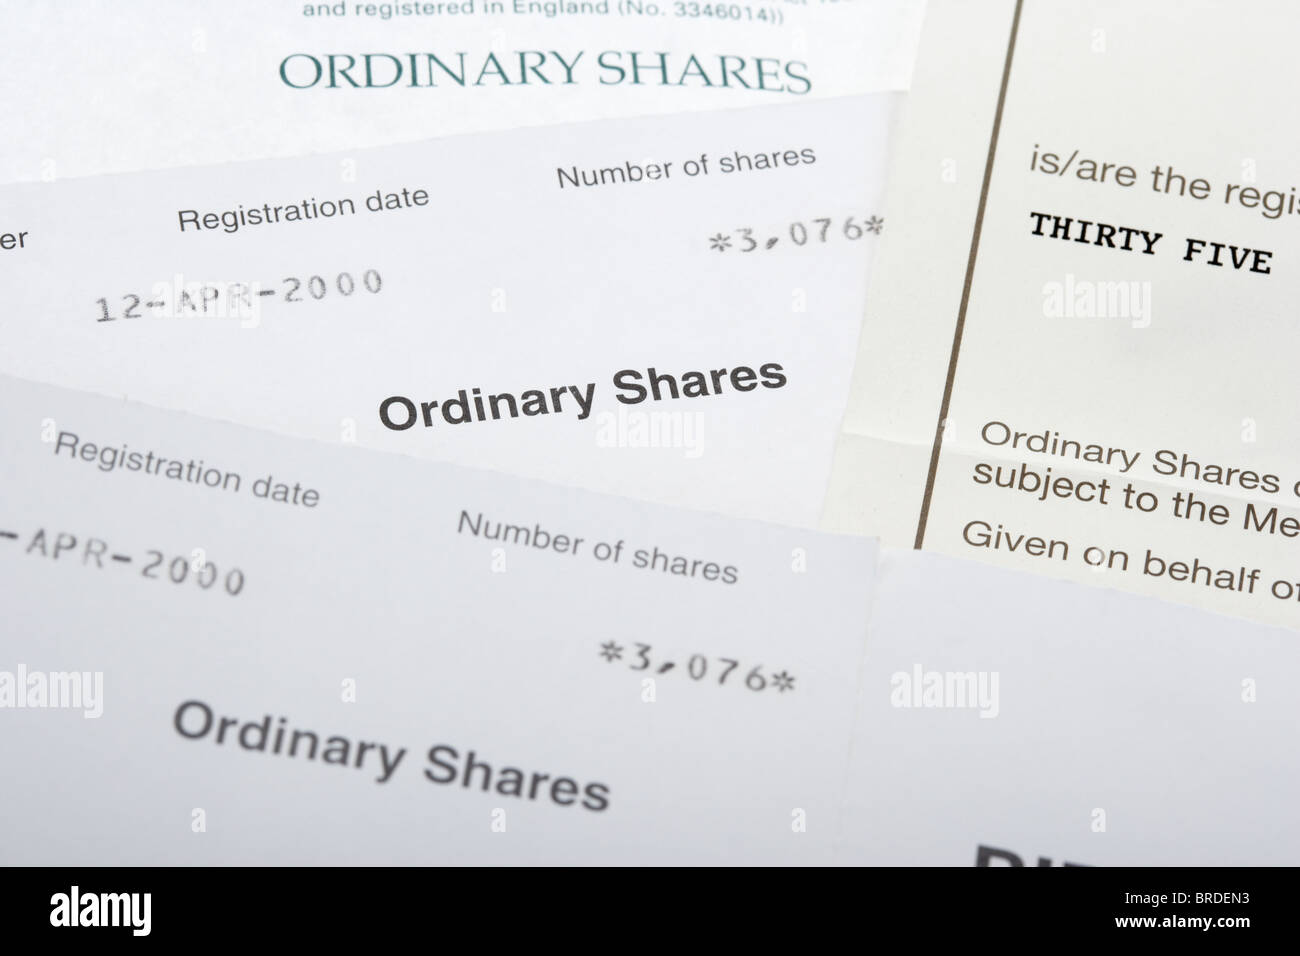 old style paper share certificate ordinary share certificates in the uk Stock Photo